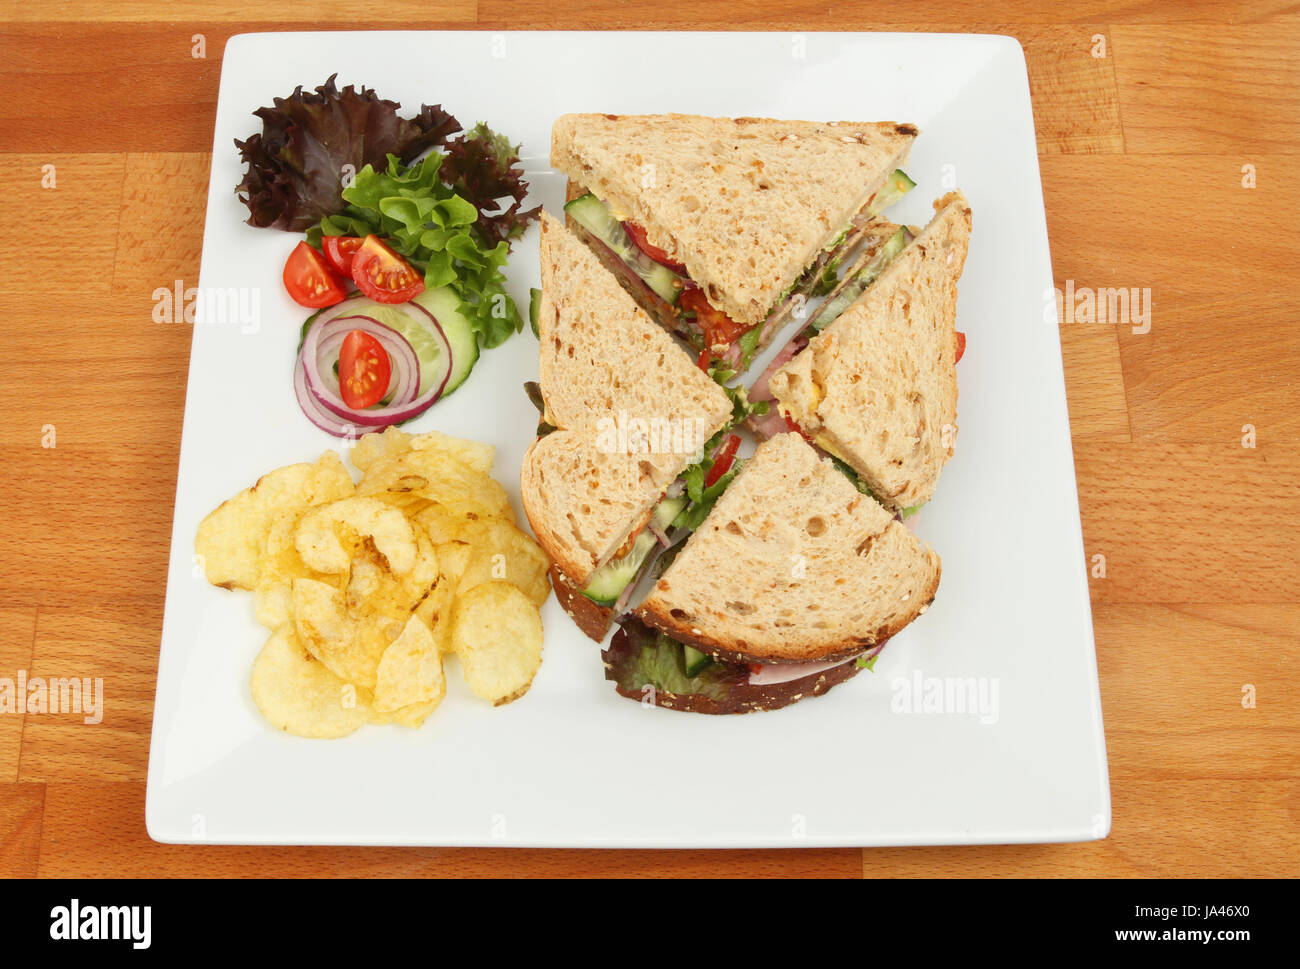 Ham salad sandwich with salad garnish and potato crisps on a plate on a wooden tabletop Stock Photo